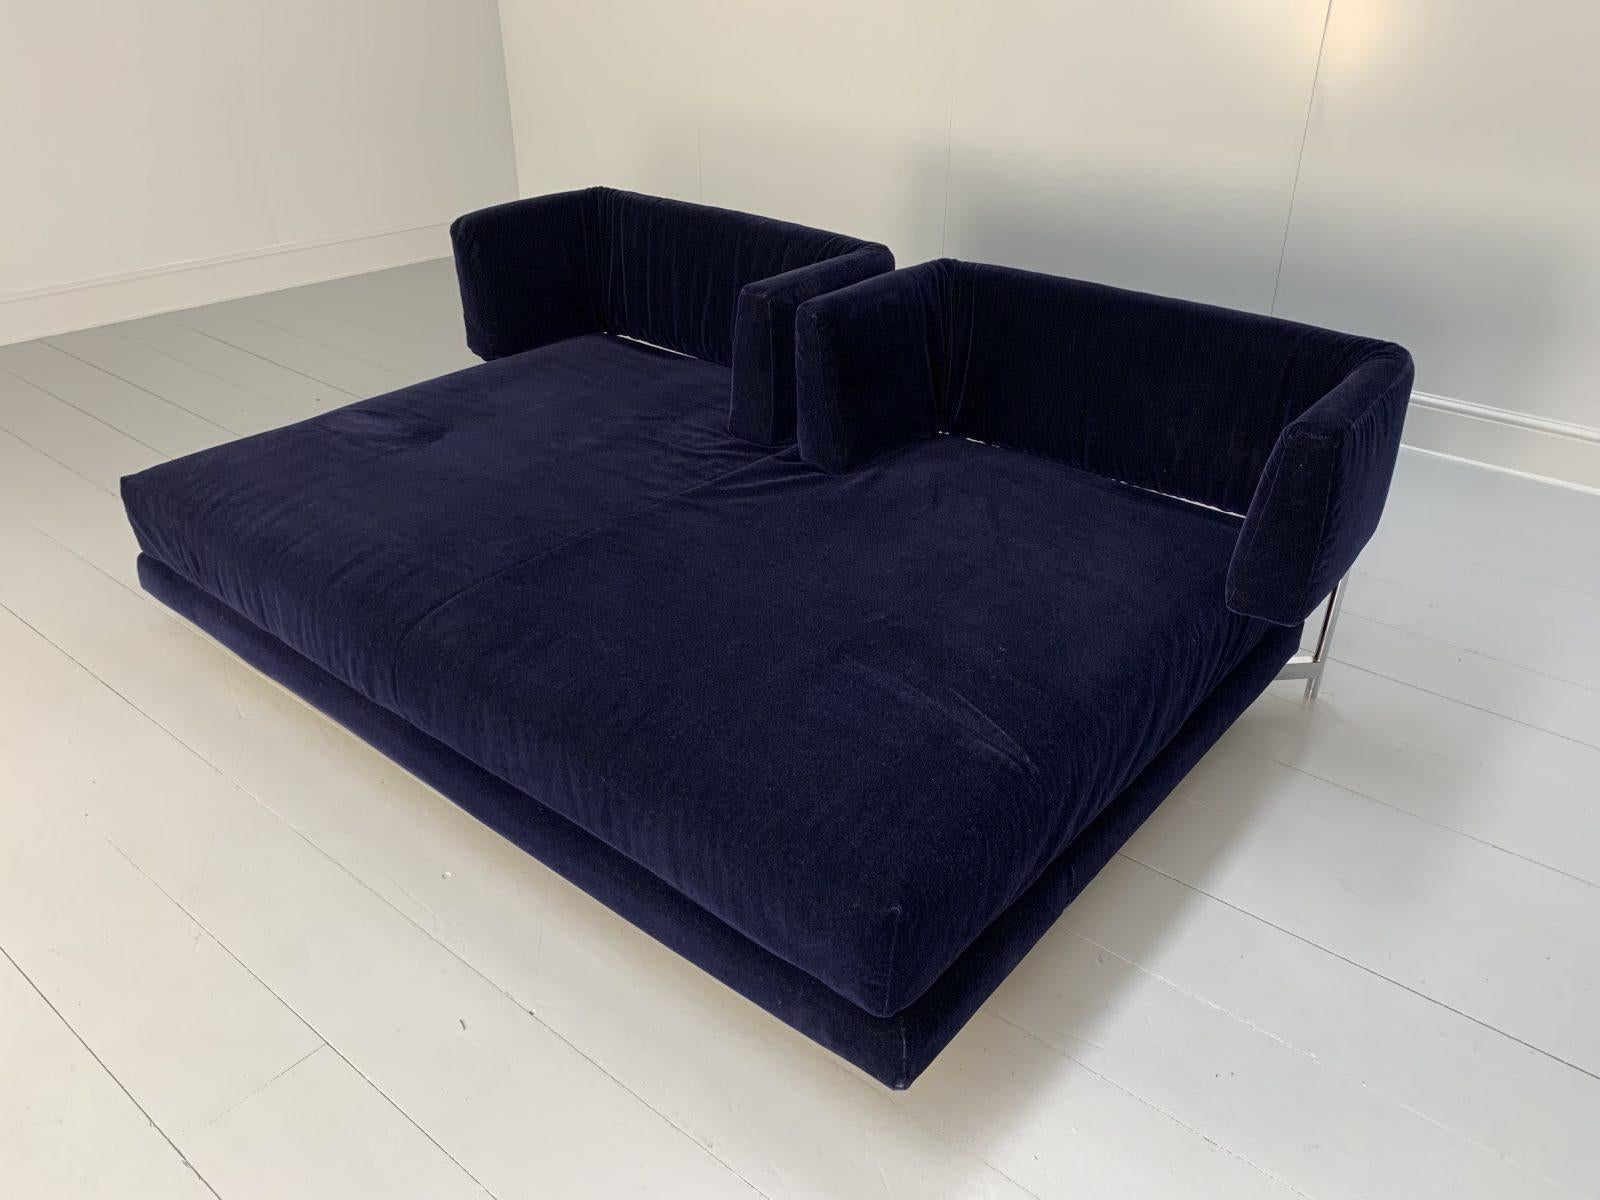 Edra “L’Homme Et La Femme” Daybed Sofa in Navy Blue Mohair Velvet In Good Condition For Sale In Barrowford, GB